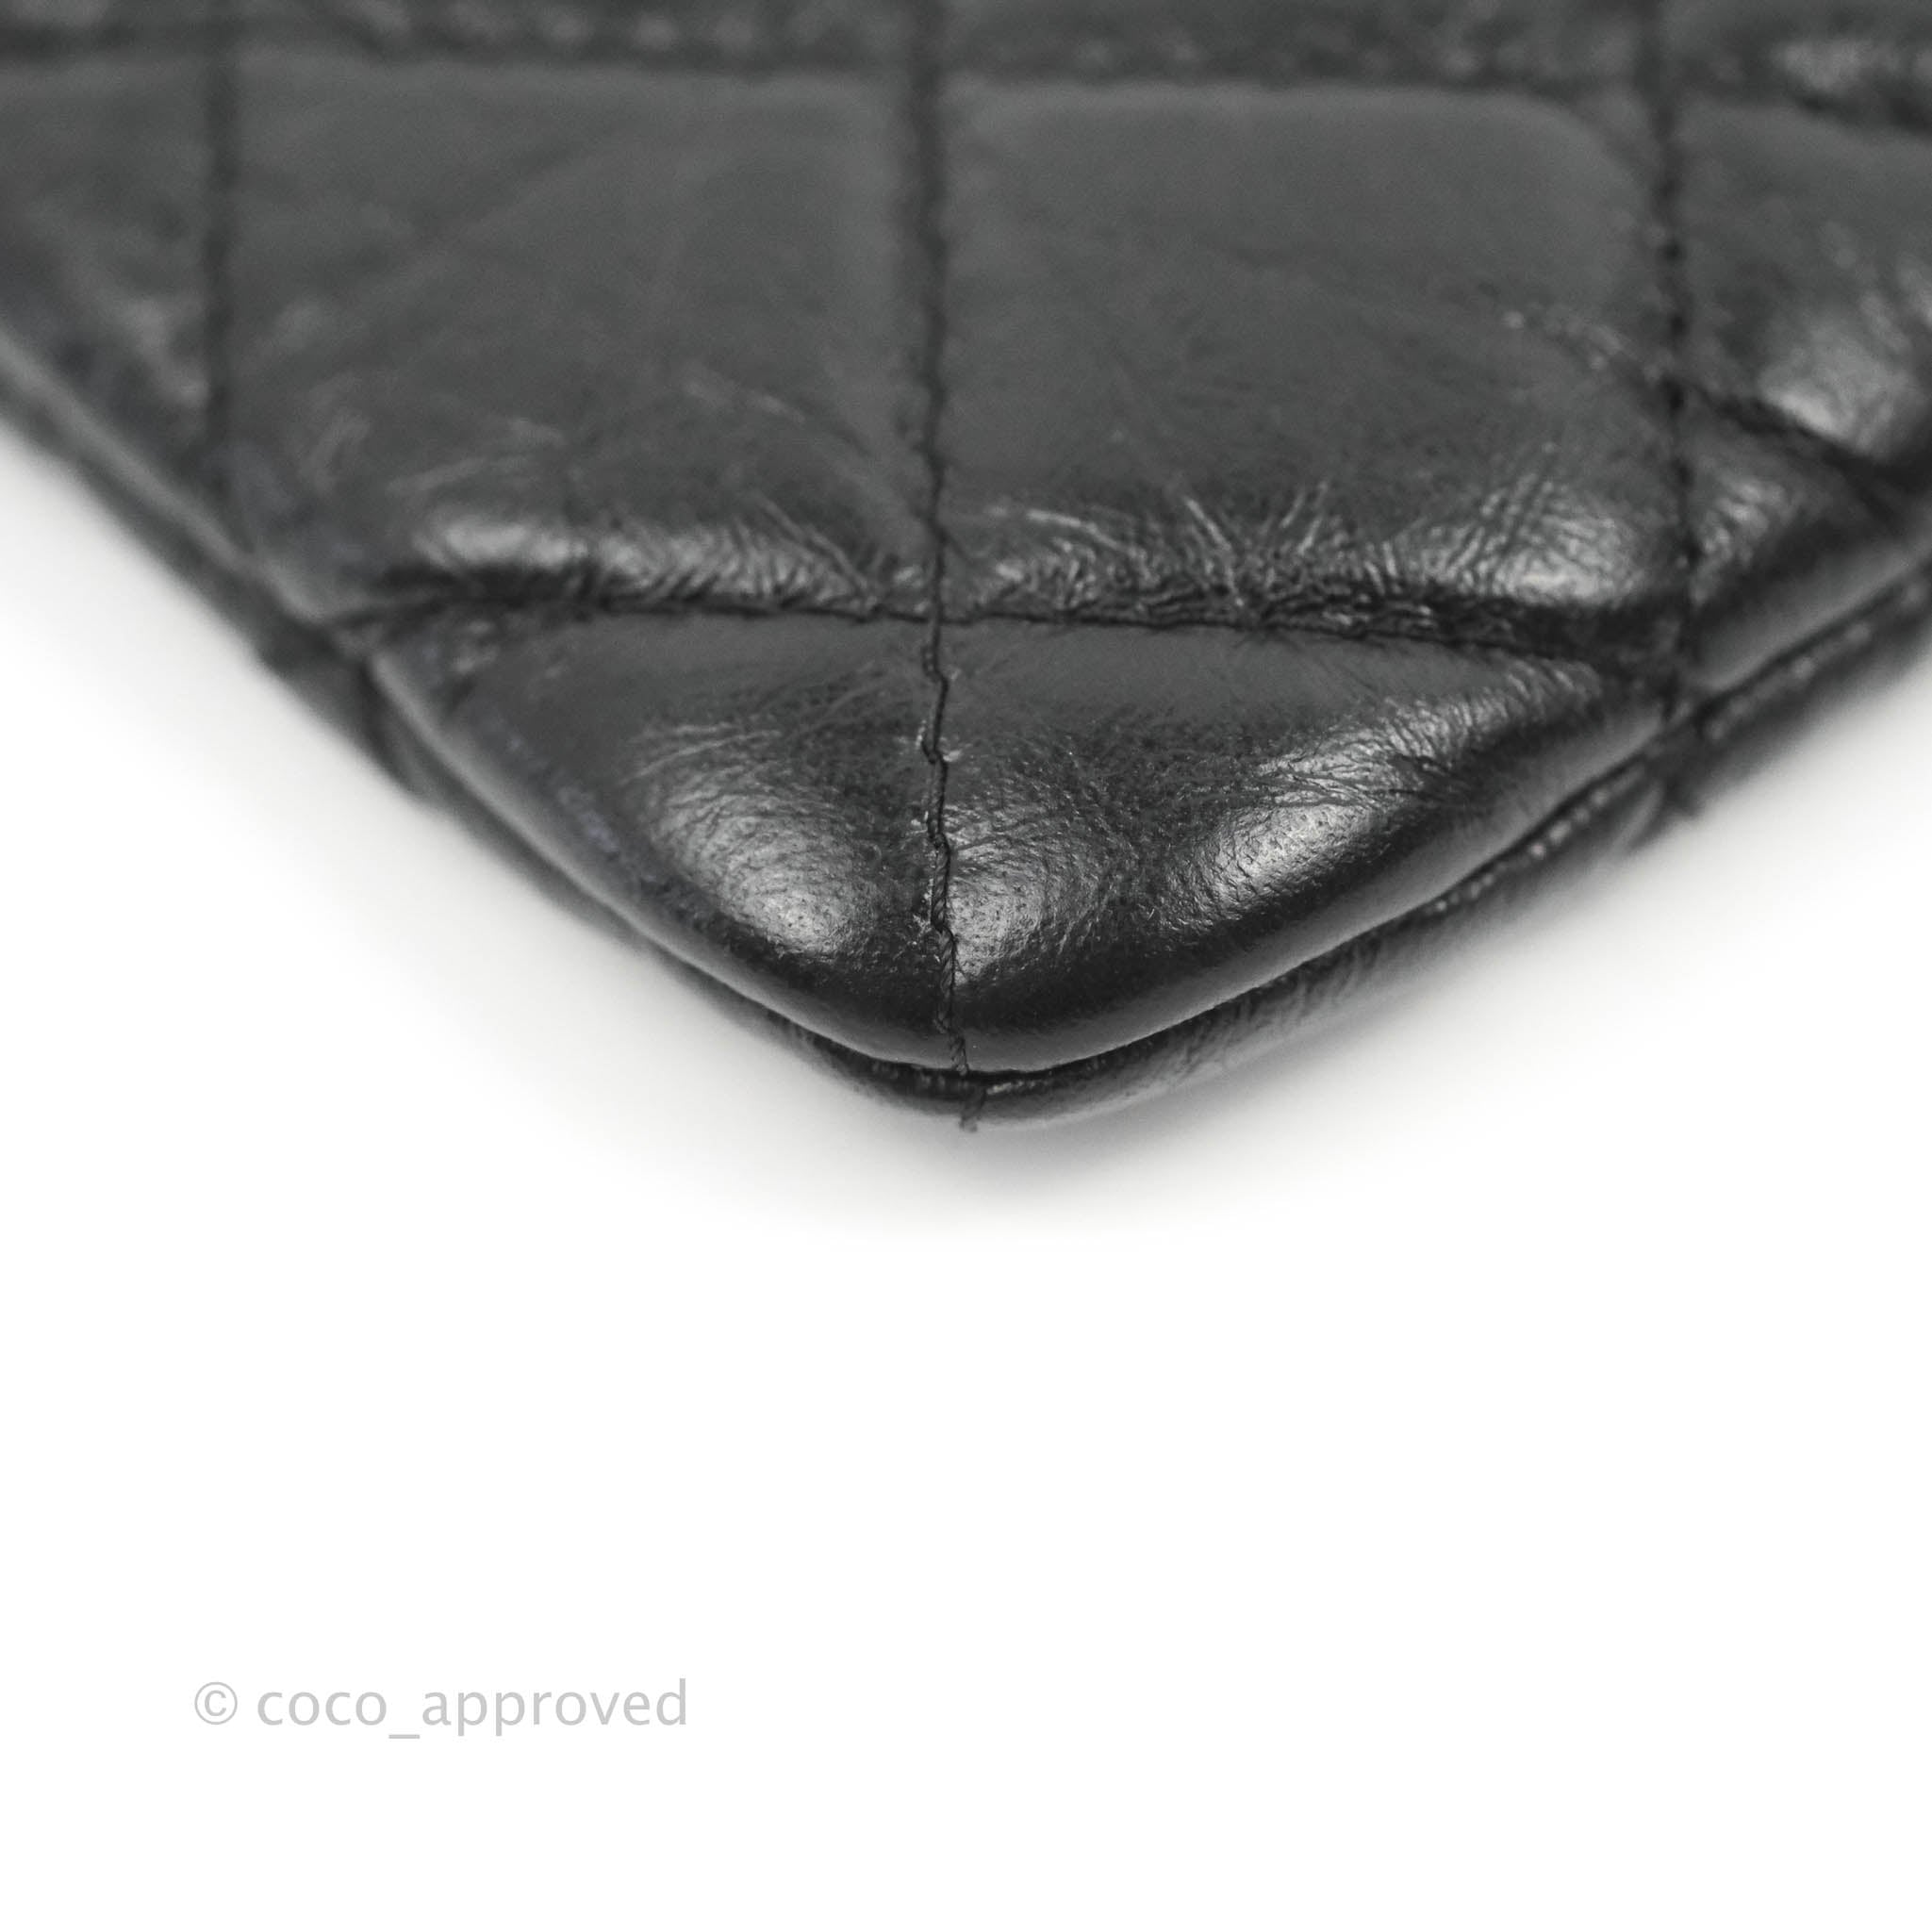 Chanel Quilted Mini Reissue O Case So Black Aged Calfskin